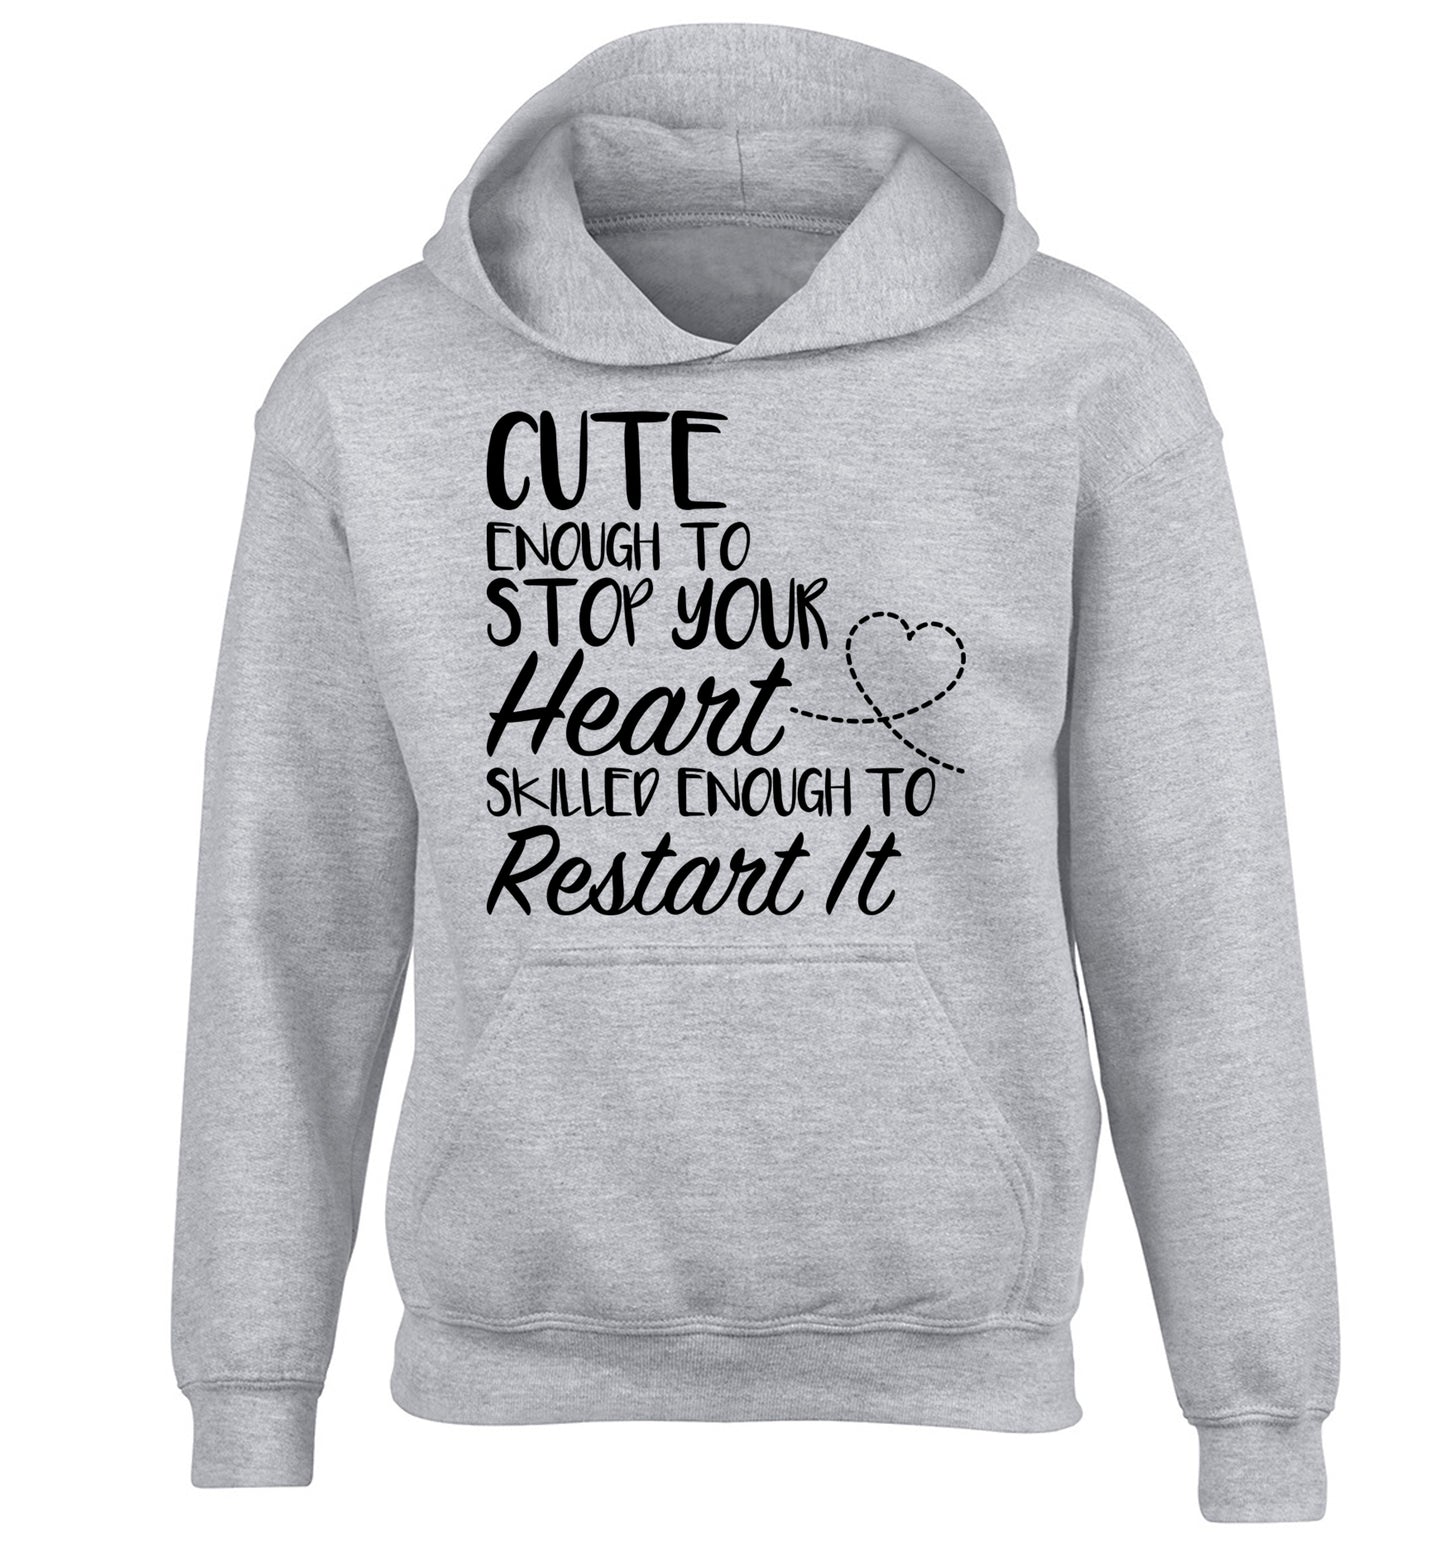 Cute enough to stop your heart skilled enough to restart it children's grey hoodie 12-13 Years